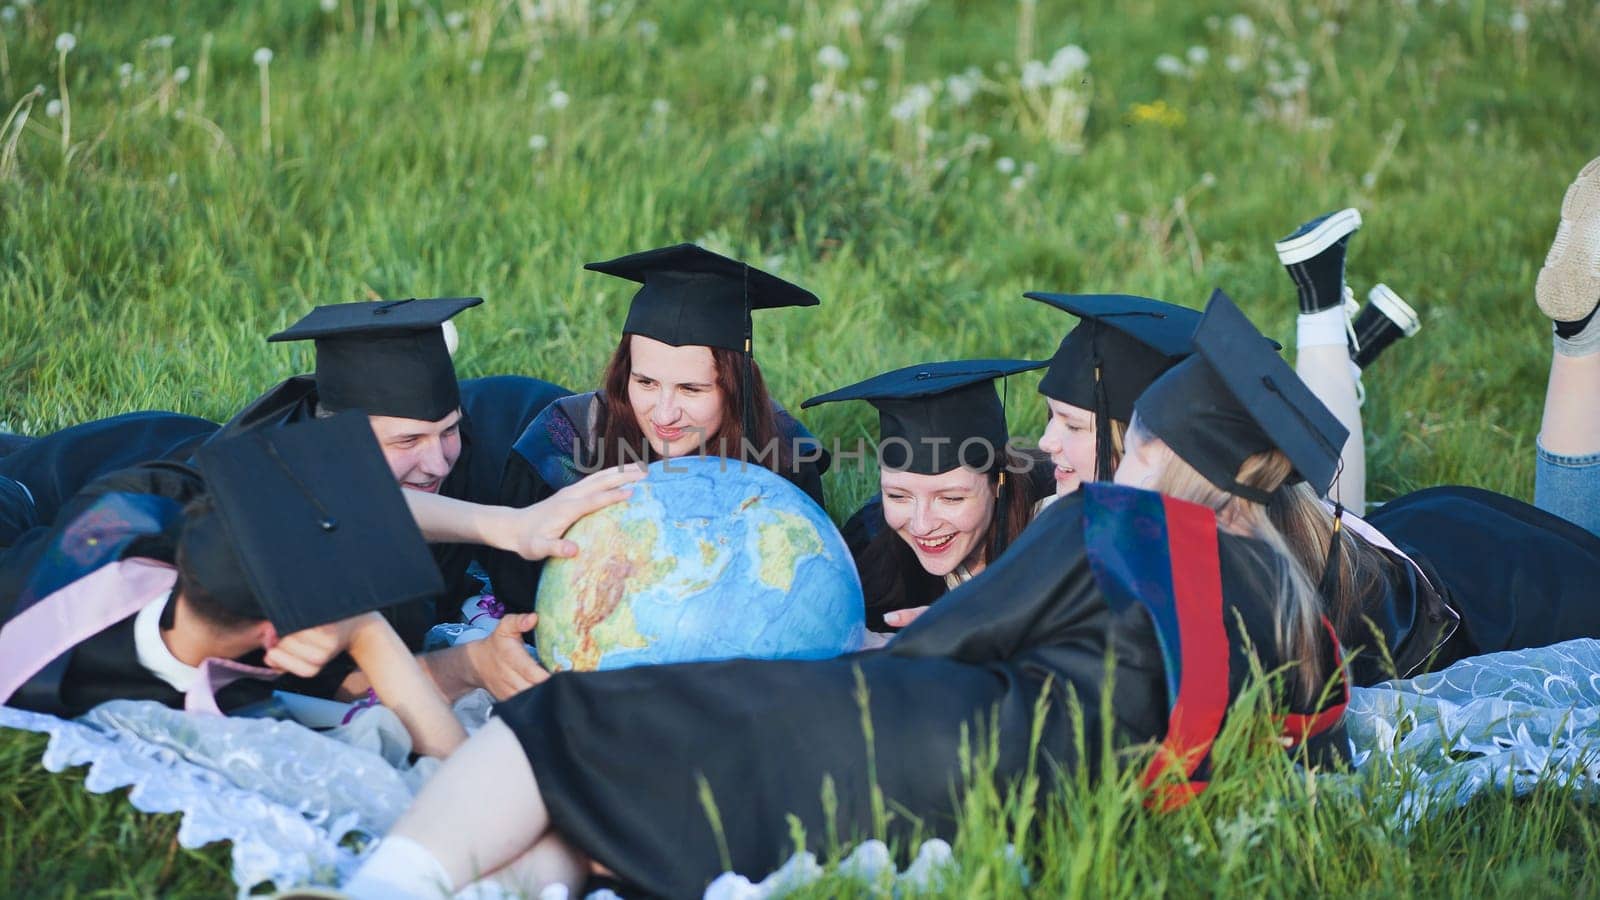 Graduate students in black robes study a globe on the grass